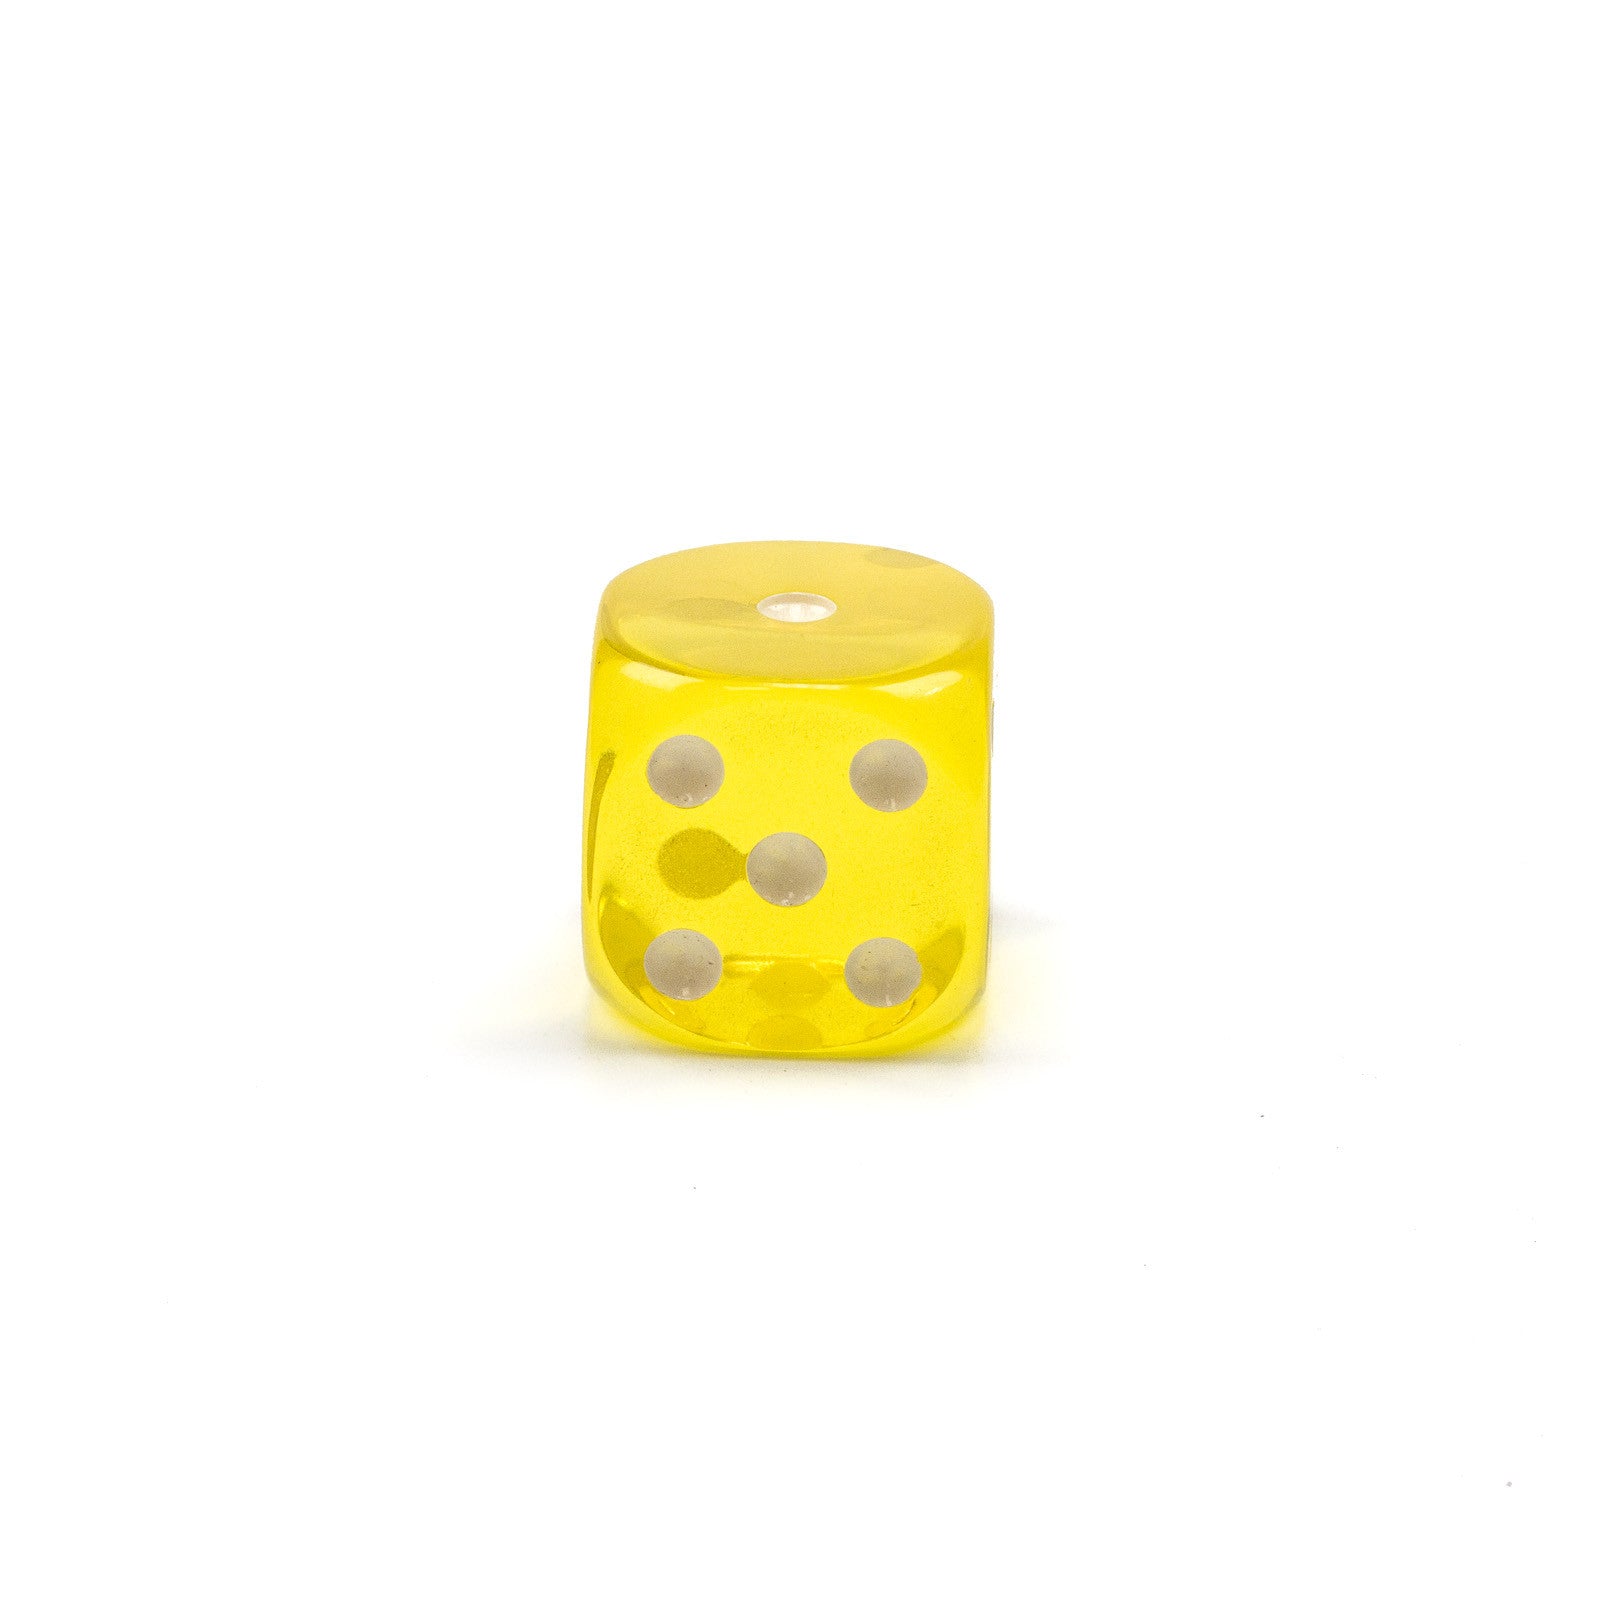 Acrylic Transparent Dice - 30 mm / 1.25 inch -  Sold Individually - Casino Supply - 1